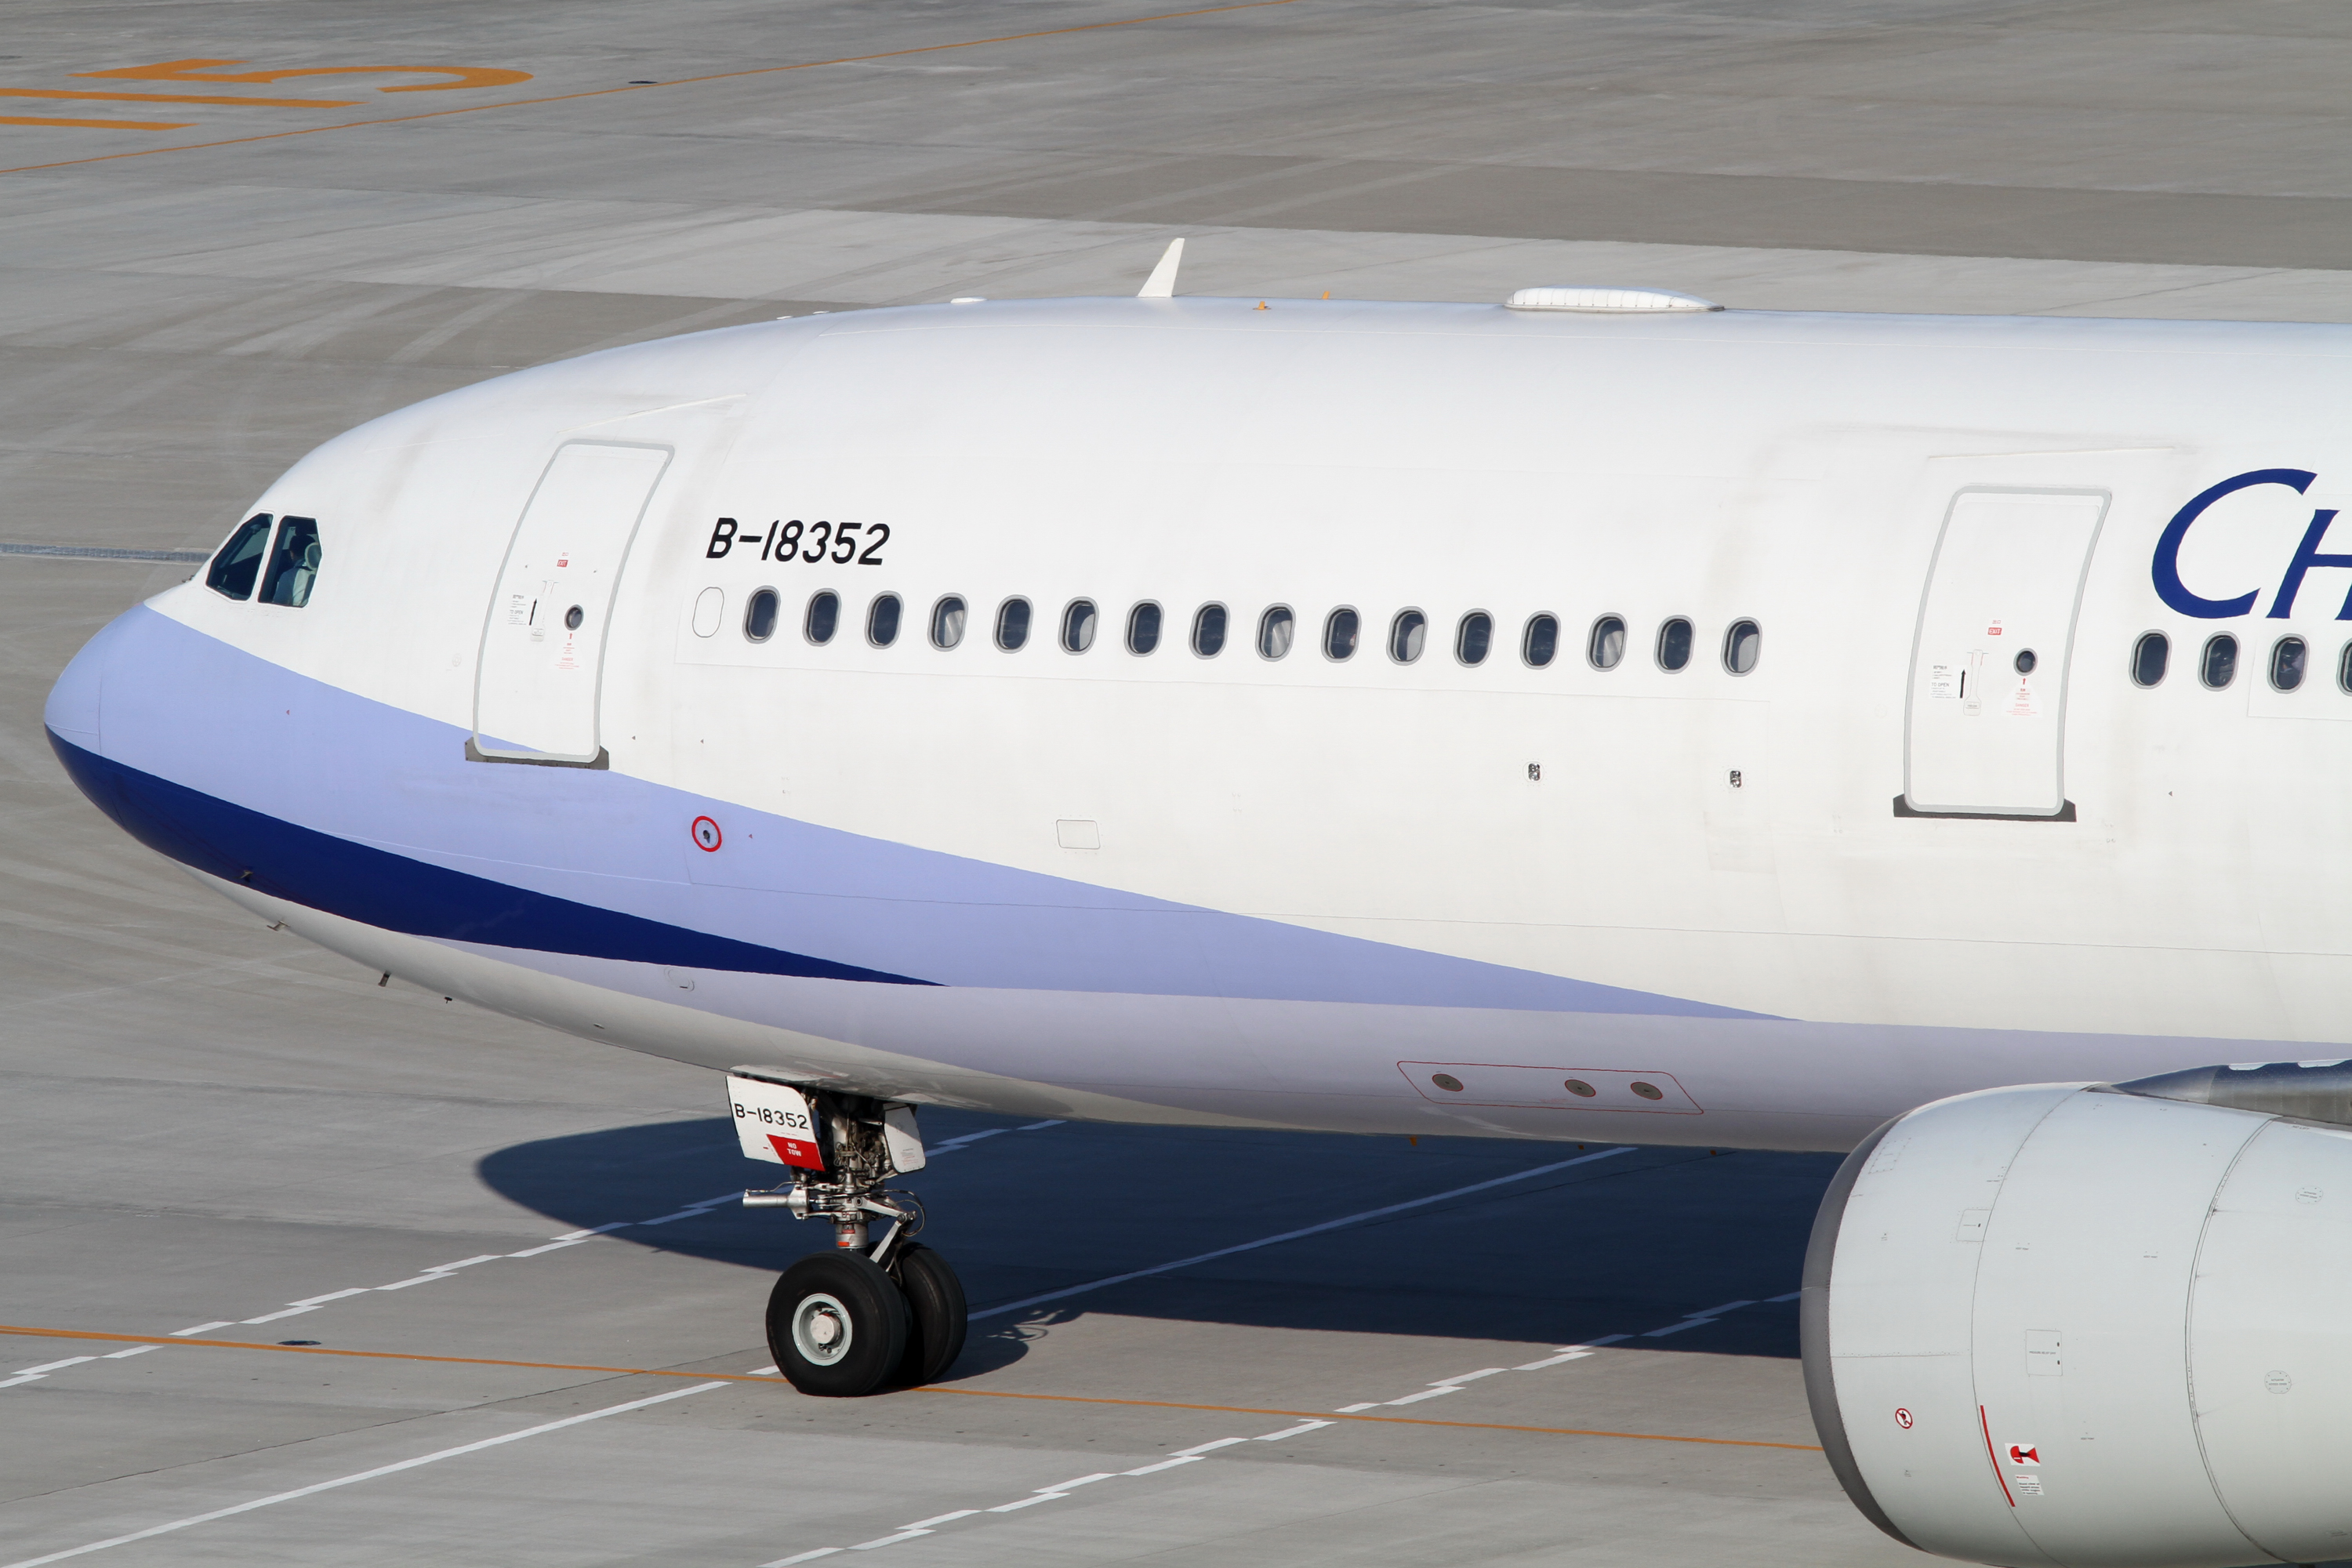 China_Airlines_A330-300%28B-18352%29_%285213874779%29.jpg